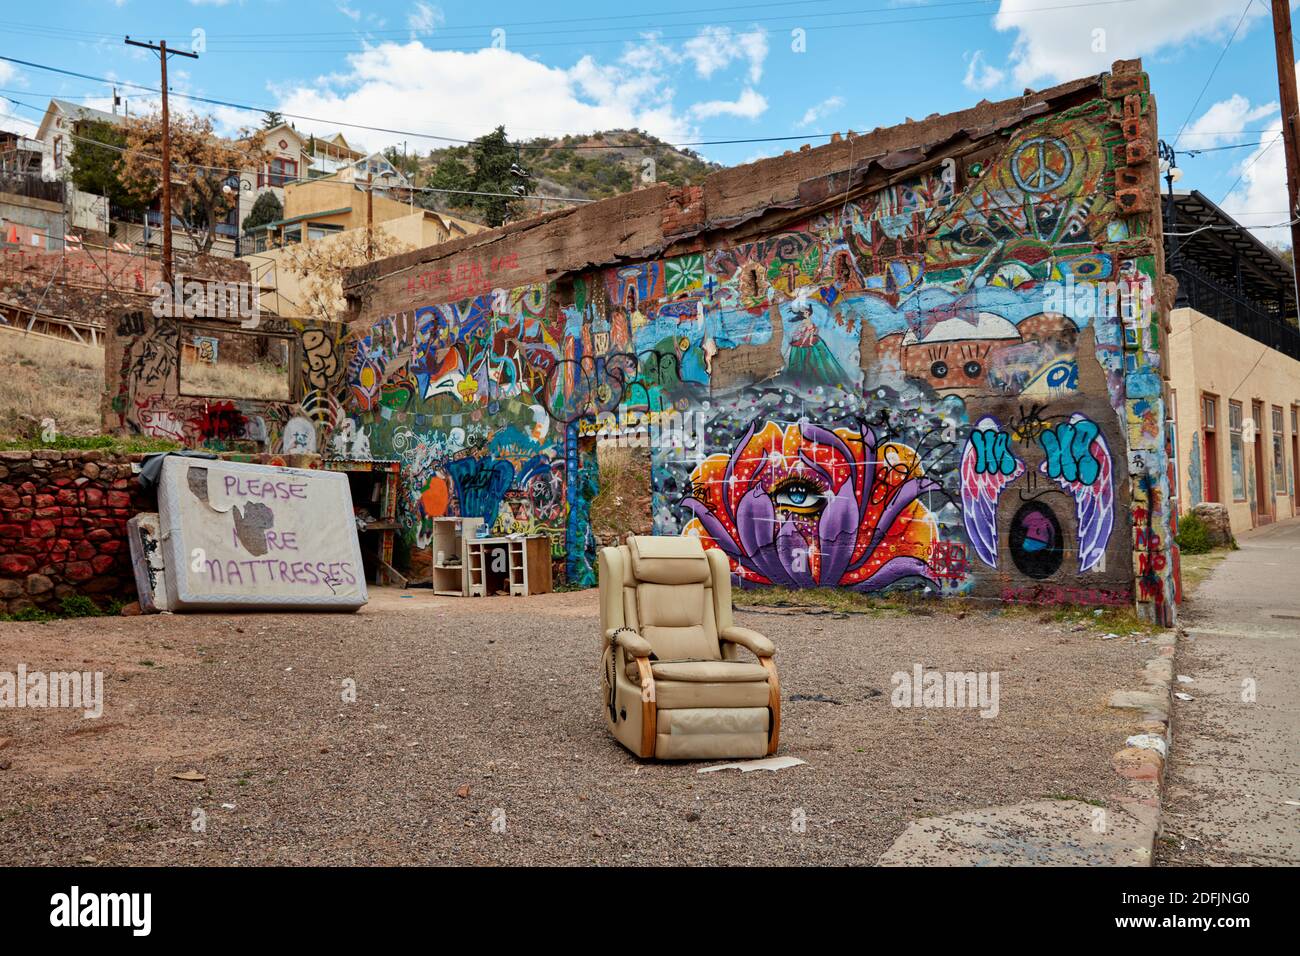 Discarded chair sitting in a vacat lot that has been turned into an area for graffiti artists in Bisbee, Arizona Stock Photo